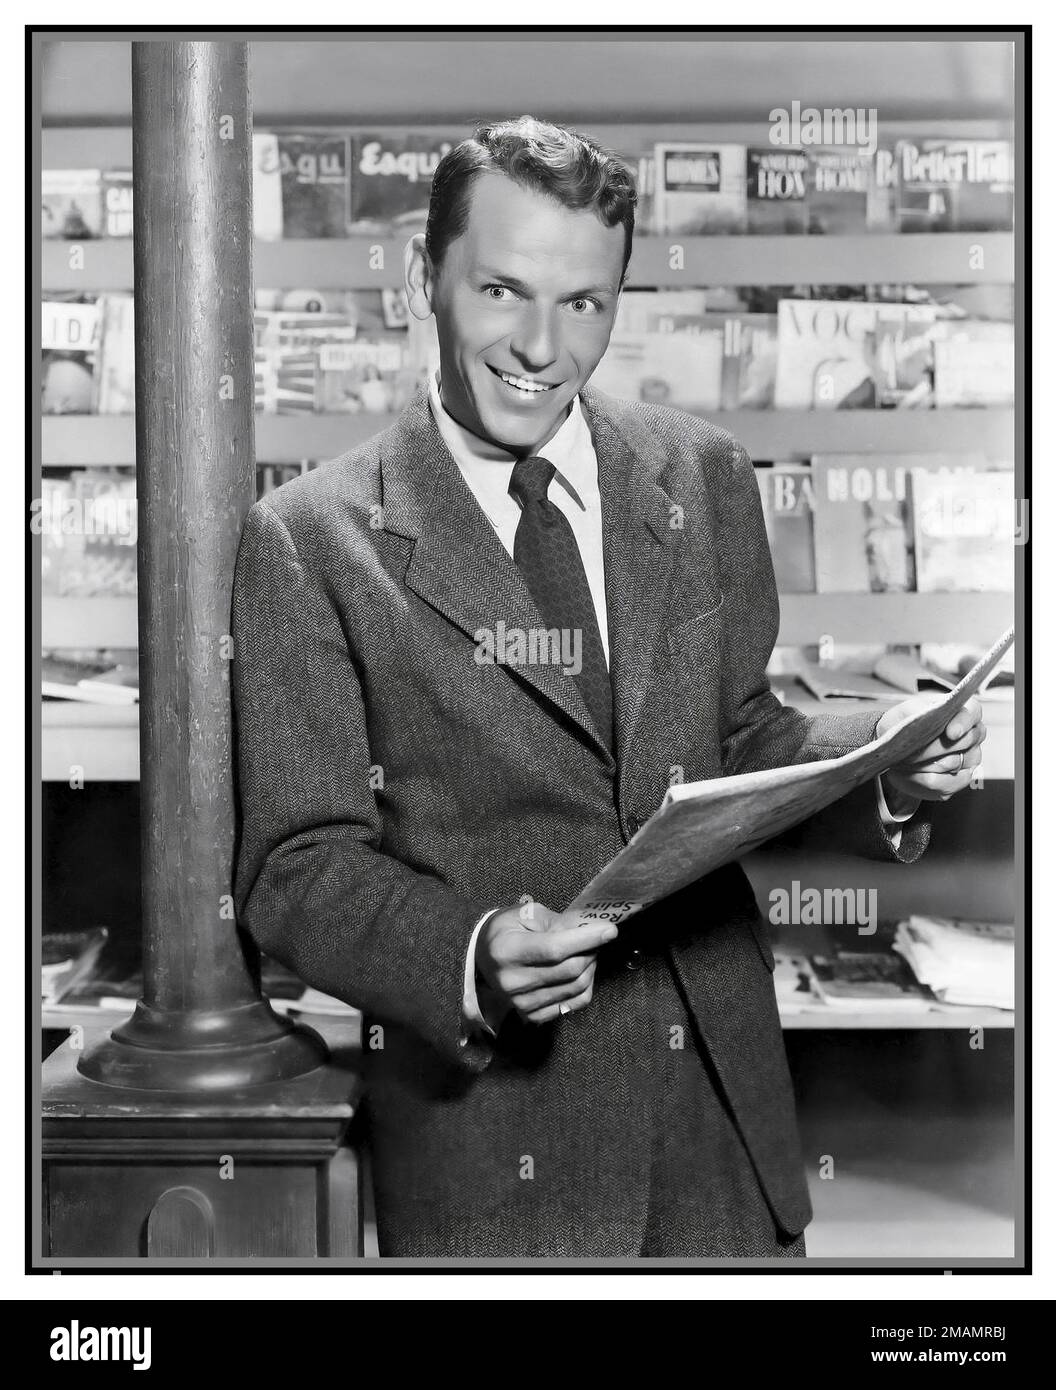 FRANK SINATRA HOLLYWOOD PUBLICITY POSED STUDIO STILL Publicity photo of Frank Sinatra in 1954 holding a newspaper.in magazine newspaper store shop outlet Stock Photo